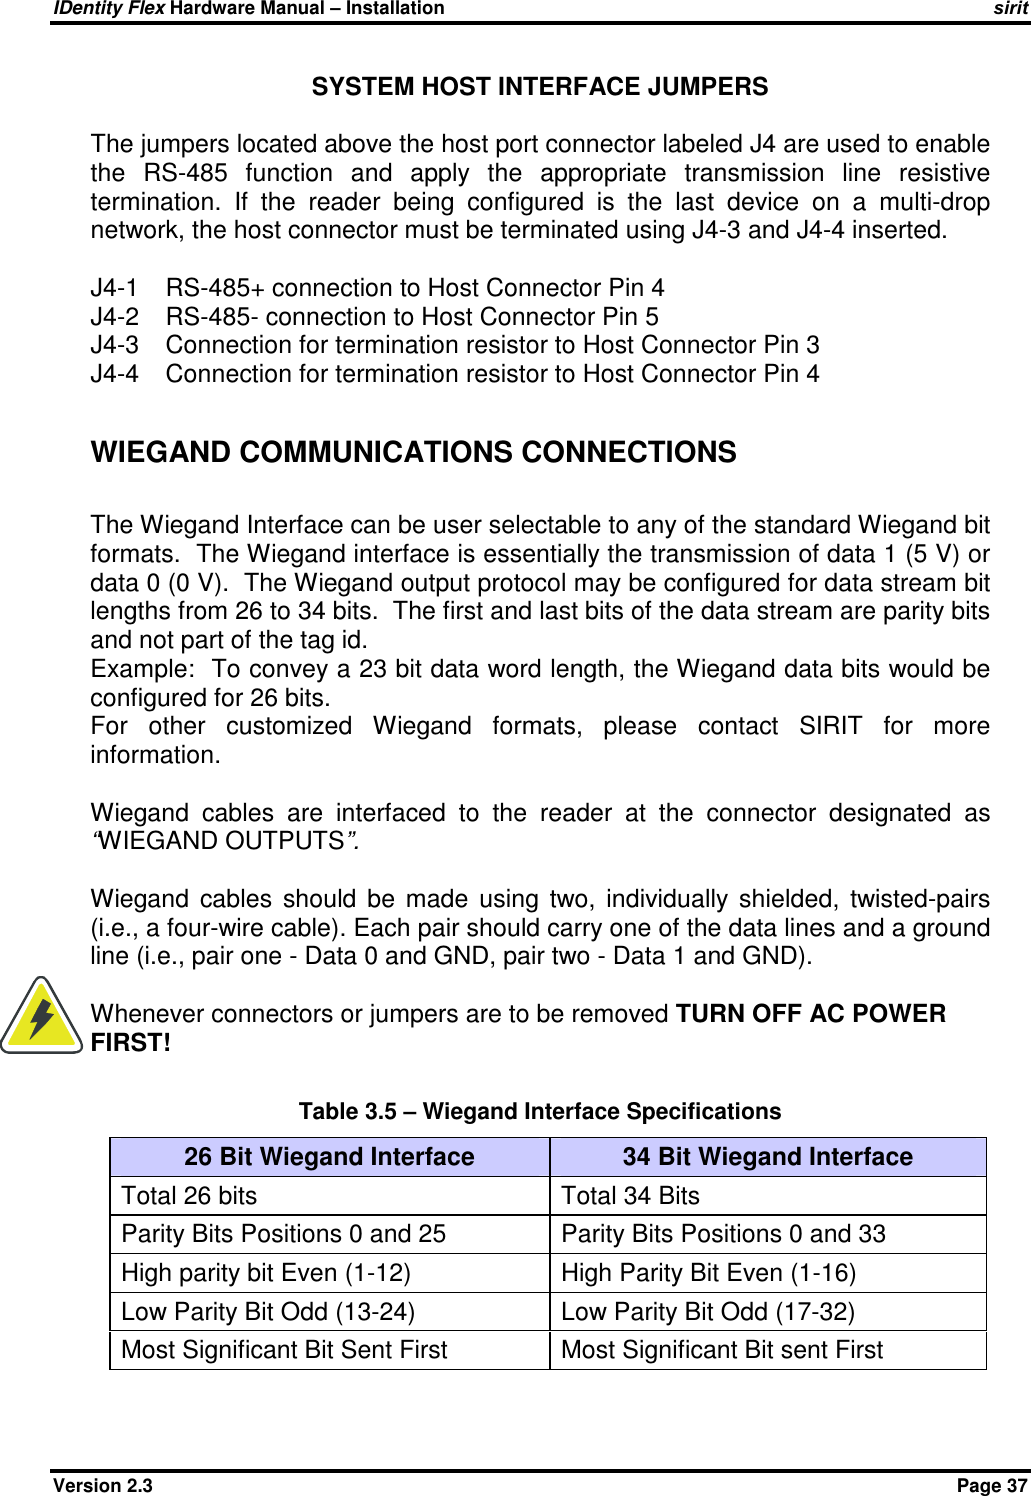 IDentity Flex Hardware Manual – Installation   sirit Version 2.3    Page 37 SYSTEM HOST INTERFACE JUMPERS  The jumpers located above the host port connector labeled J4 are used to enable the  RS-485  function  and  apply  the  appropriate  transmission  line  resistive termination.  If  the  reader  being  configured  is  the  last  device  on  a  multi-drop network, the host connector must be terminated using J4-3 and J4-4 inserted.  J4-1  RS-485+ connection to Host Connector Pin 4 J4-2  RS-485- connection to Host Connector Pin 5 J4-3  Connection for termination resistor to Host Connector Pin 3 J4-4  Connection for termination resistor to Host Connector Pin 4  WIEGAND COMMUNICATIONS CONNECTIONS  The Wiegand Interface can be user selectable to any of the standard Wiegand bit formats.  The Wiegand interface is essentially the transmission of data 1 (5 V) or data 0 (0 V).  The Wiegand output protocol may be configured for data stream bit lengths from 26 to 34 bits.  The first and last bits of the data stream are parity bits and not part of the tag id.  Example:  To convey a 23 bit data word length, the Wiegand data bits would be configured for 26 bits.   For  other  customized  Wiegand  formats,  please  contact  SIRIT  for  more information.  Wiegand  cables  are  interfaced  to  the  reader  at  the  connector  designated  as “WIEGAND OUTPUTS”.  Wiegand  cables  should  be  made  using  two,  individually  shielded,  twisted-pairs (i.e., a four-wire cable). Each pair should carry one of the data lines and a ground line (i.e., pair one - Data 0 and GND, pair two - Data 1 and GND).  Whenever connectors or jumpers are to be removed TURN OFF AC POWER FIRST!  Table 3.5 – Wiegand Interface Specifications 26 Bit Wiegand Interface  34 Bit Wiegand Interface Total 26 bits  Total 34 Bits Parity Bits Positions 0 and 25  Parity Bits Positions 0 and 33 High parity bit Even (1-12)  High Parity Bit Even (1-16) Low Parity Bit Odd (13-24)  Low Parity Bit Odd (17-32) Most Significant Bit Sent First  Most Significant Bit sent First   